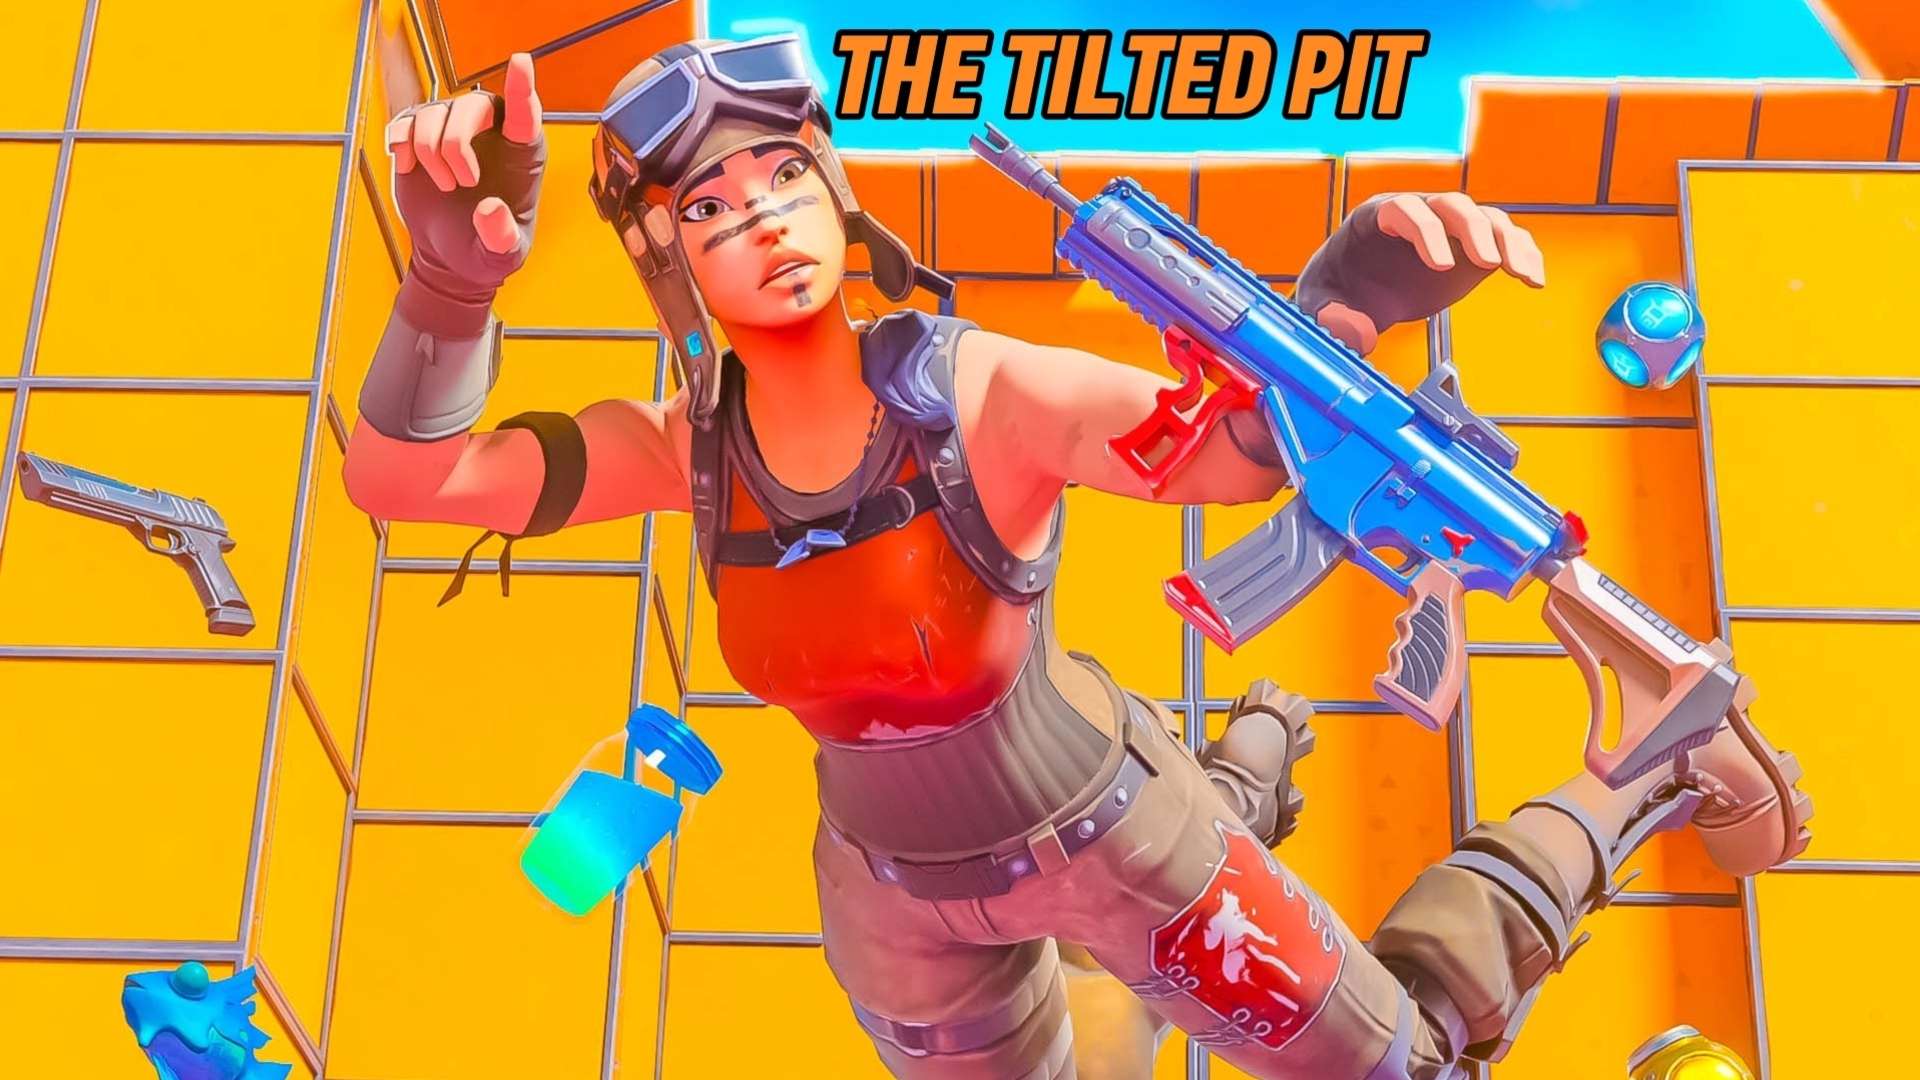 The Tilted Pit